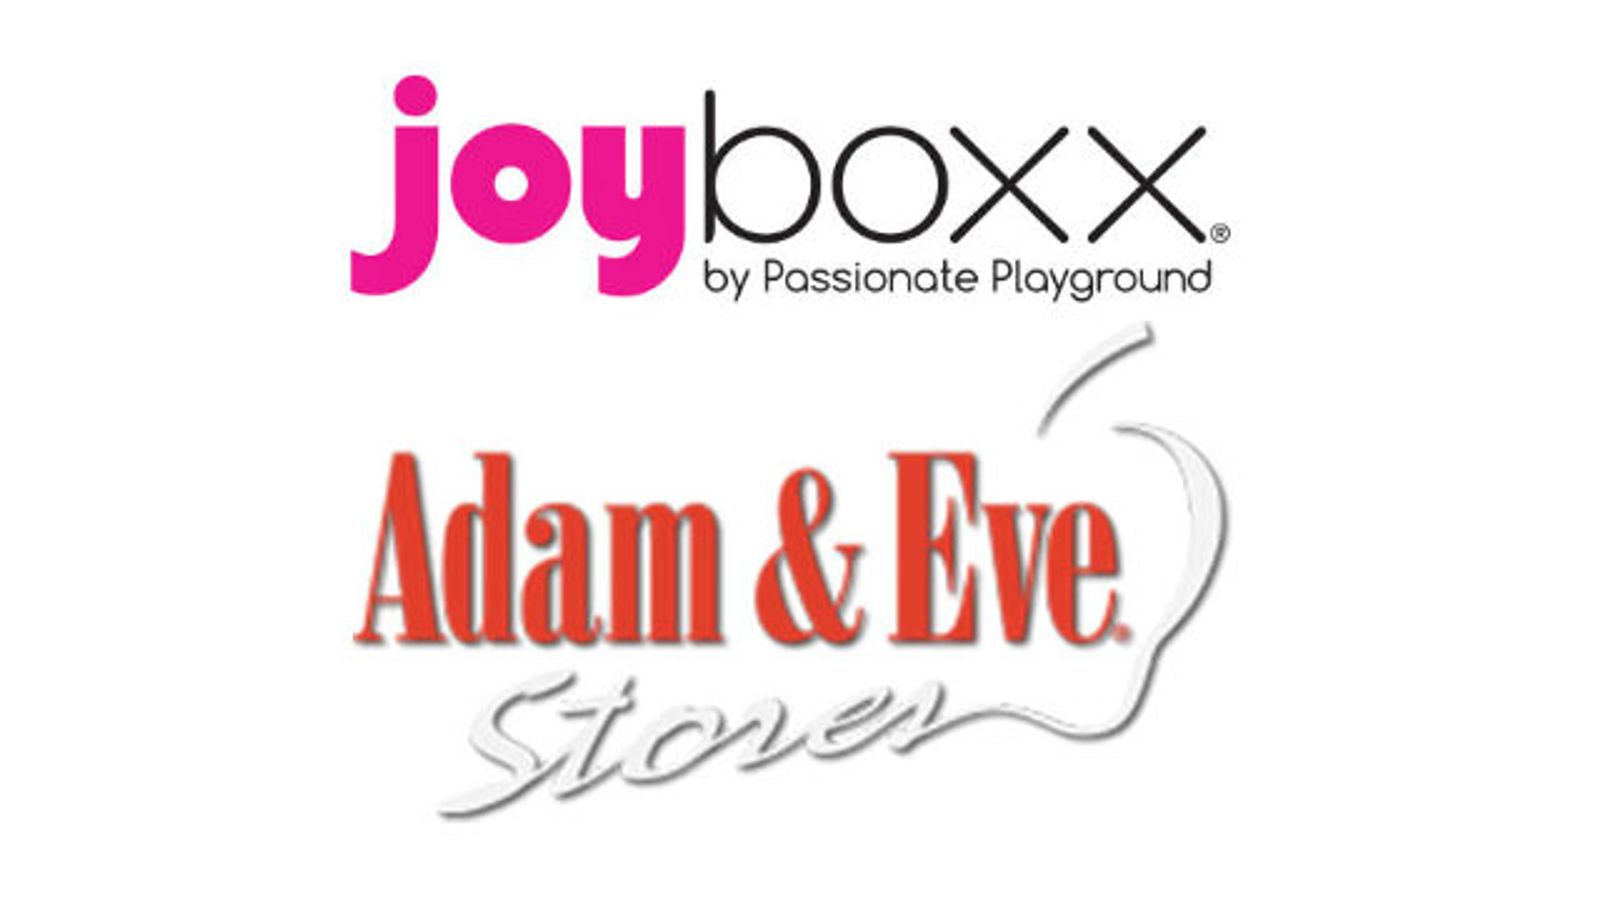 Joyboxx Now Available at Adam & Eve Retail Stores